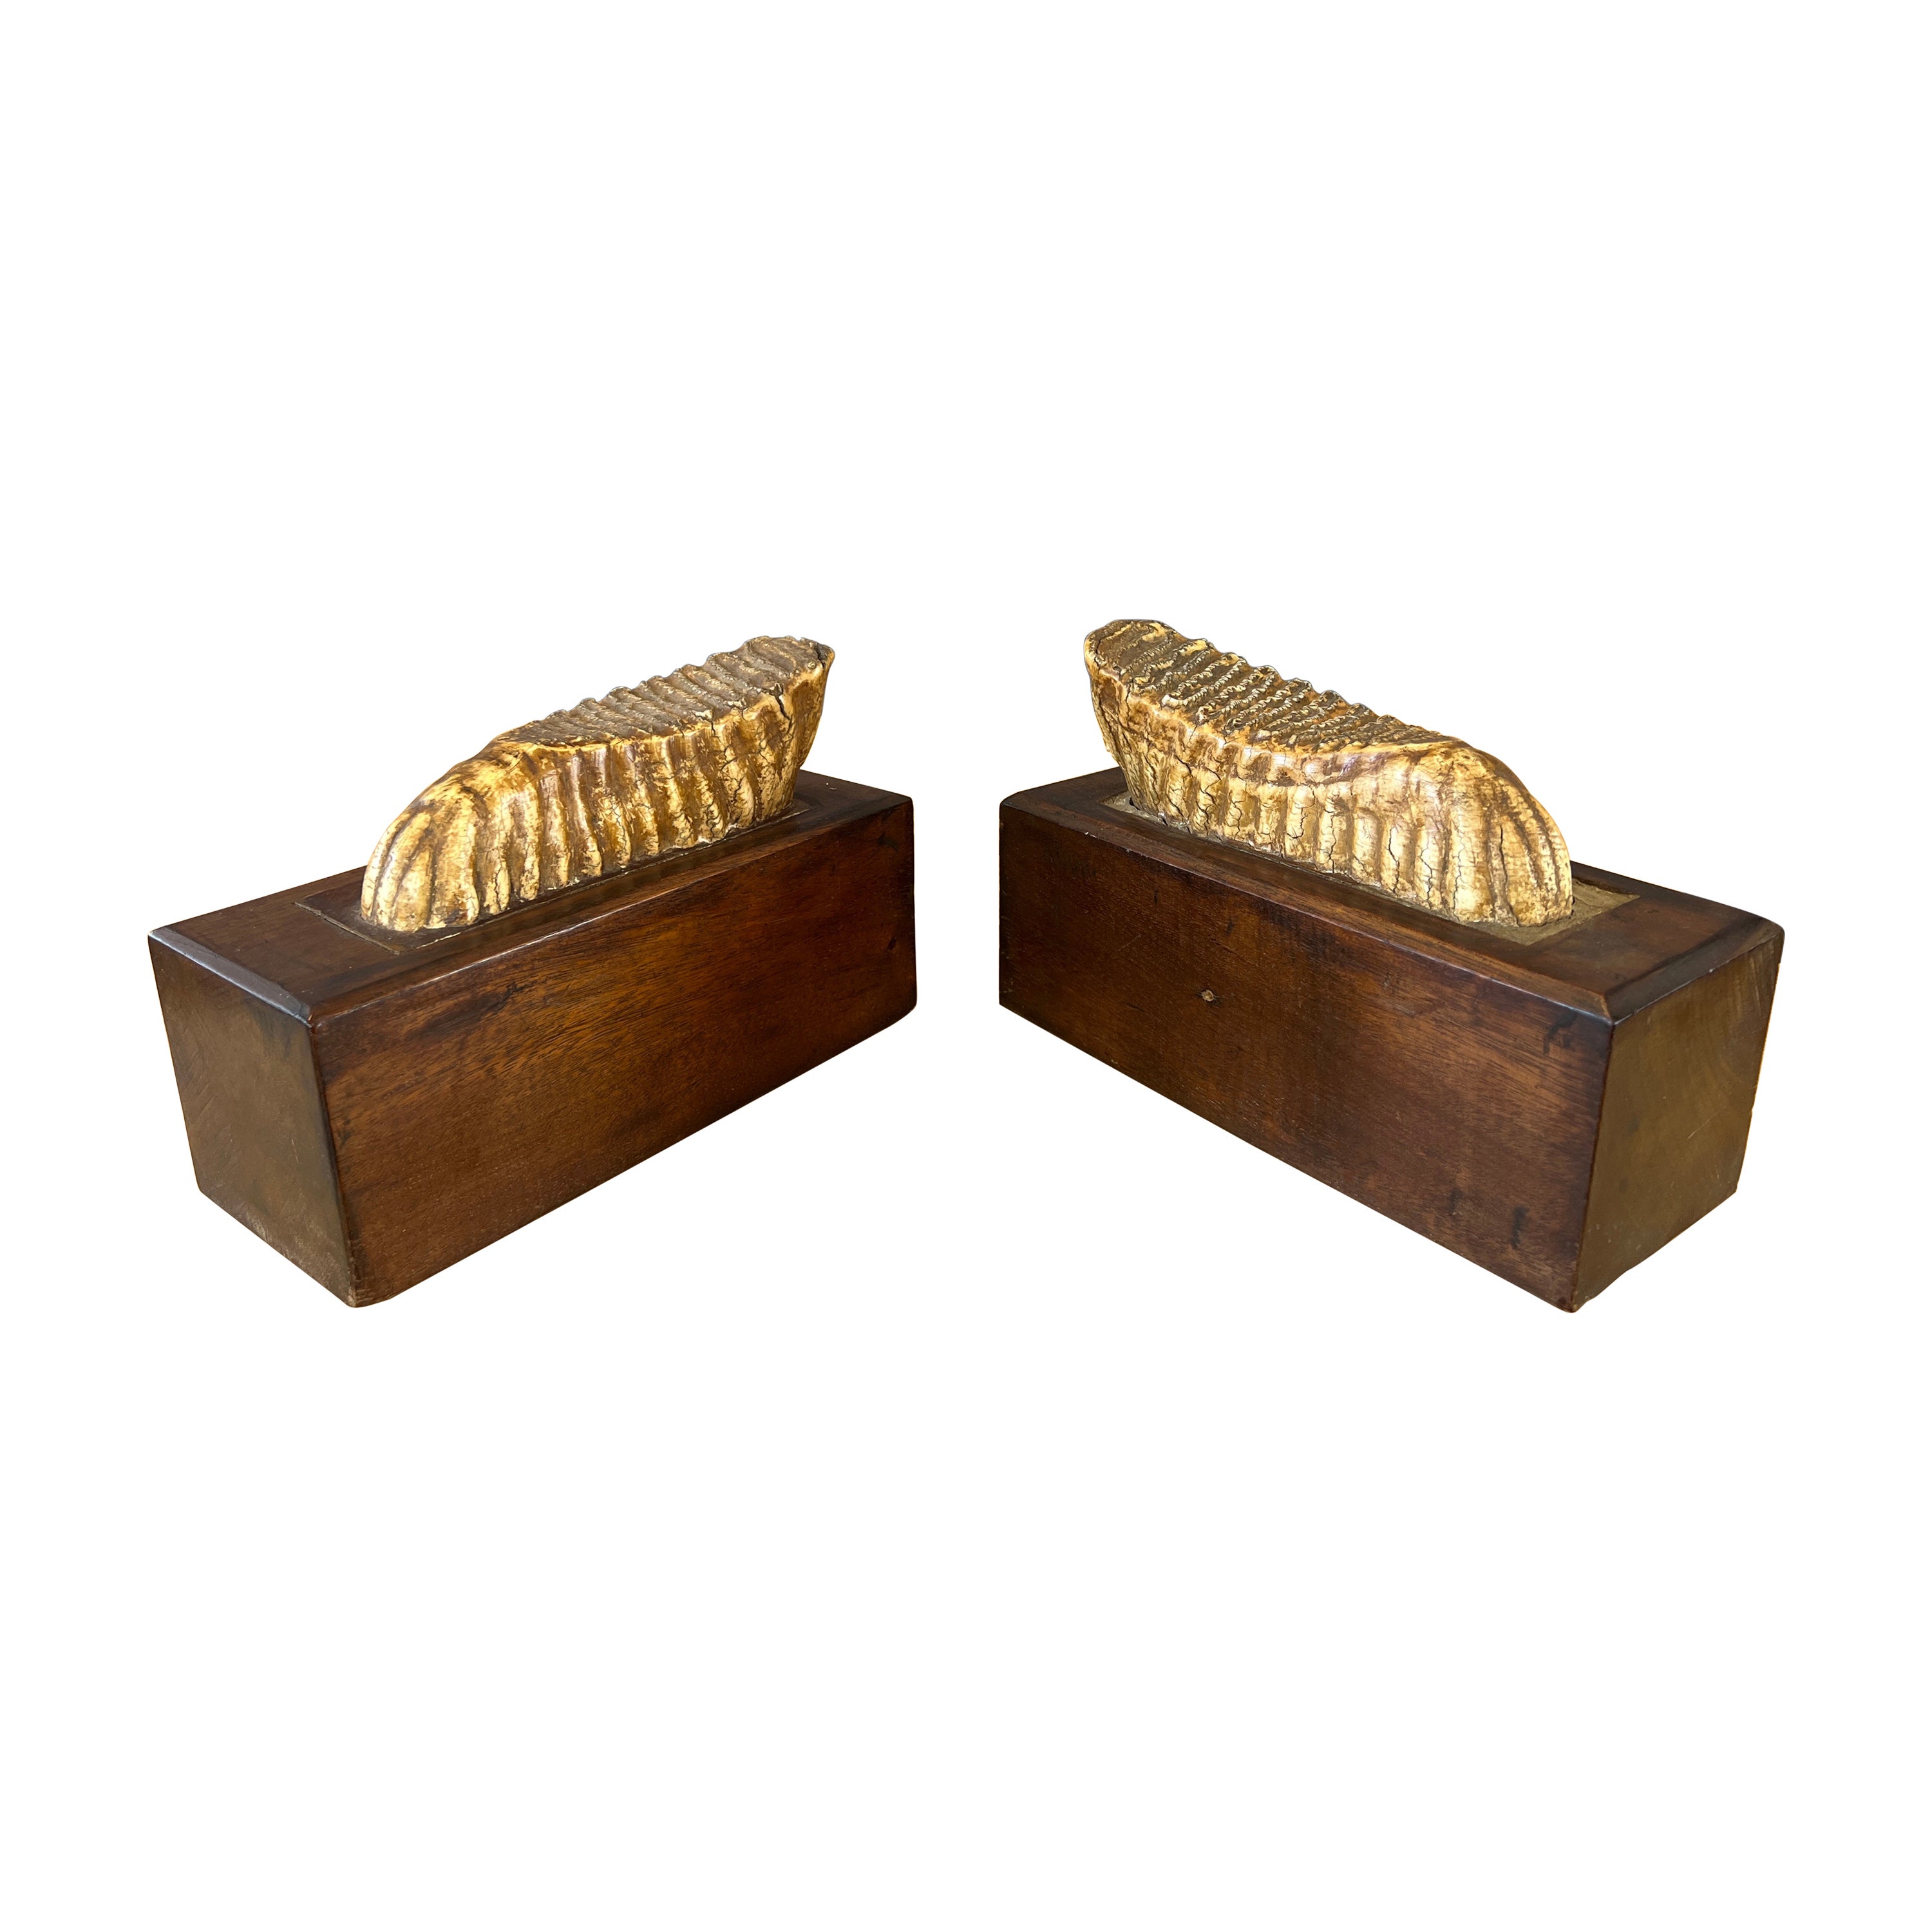 Pair of Impressive Mounted Woolly Mammoth Teeth Bookends